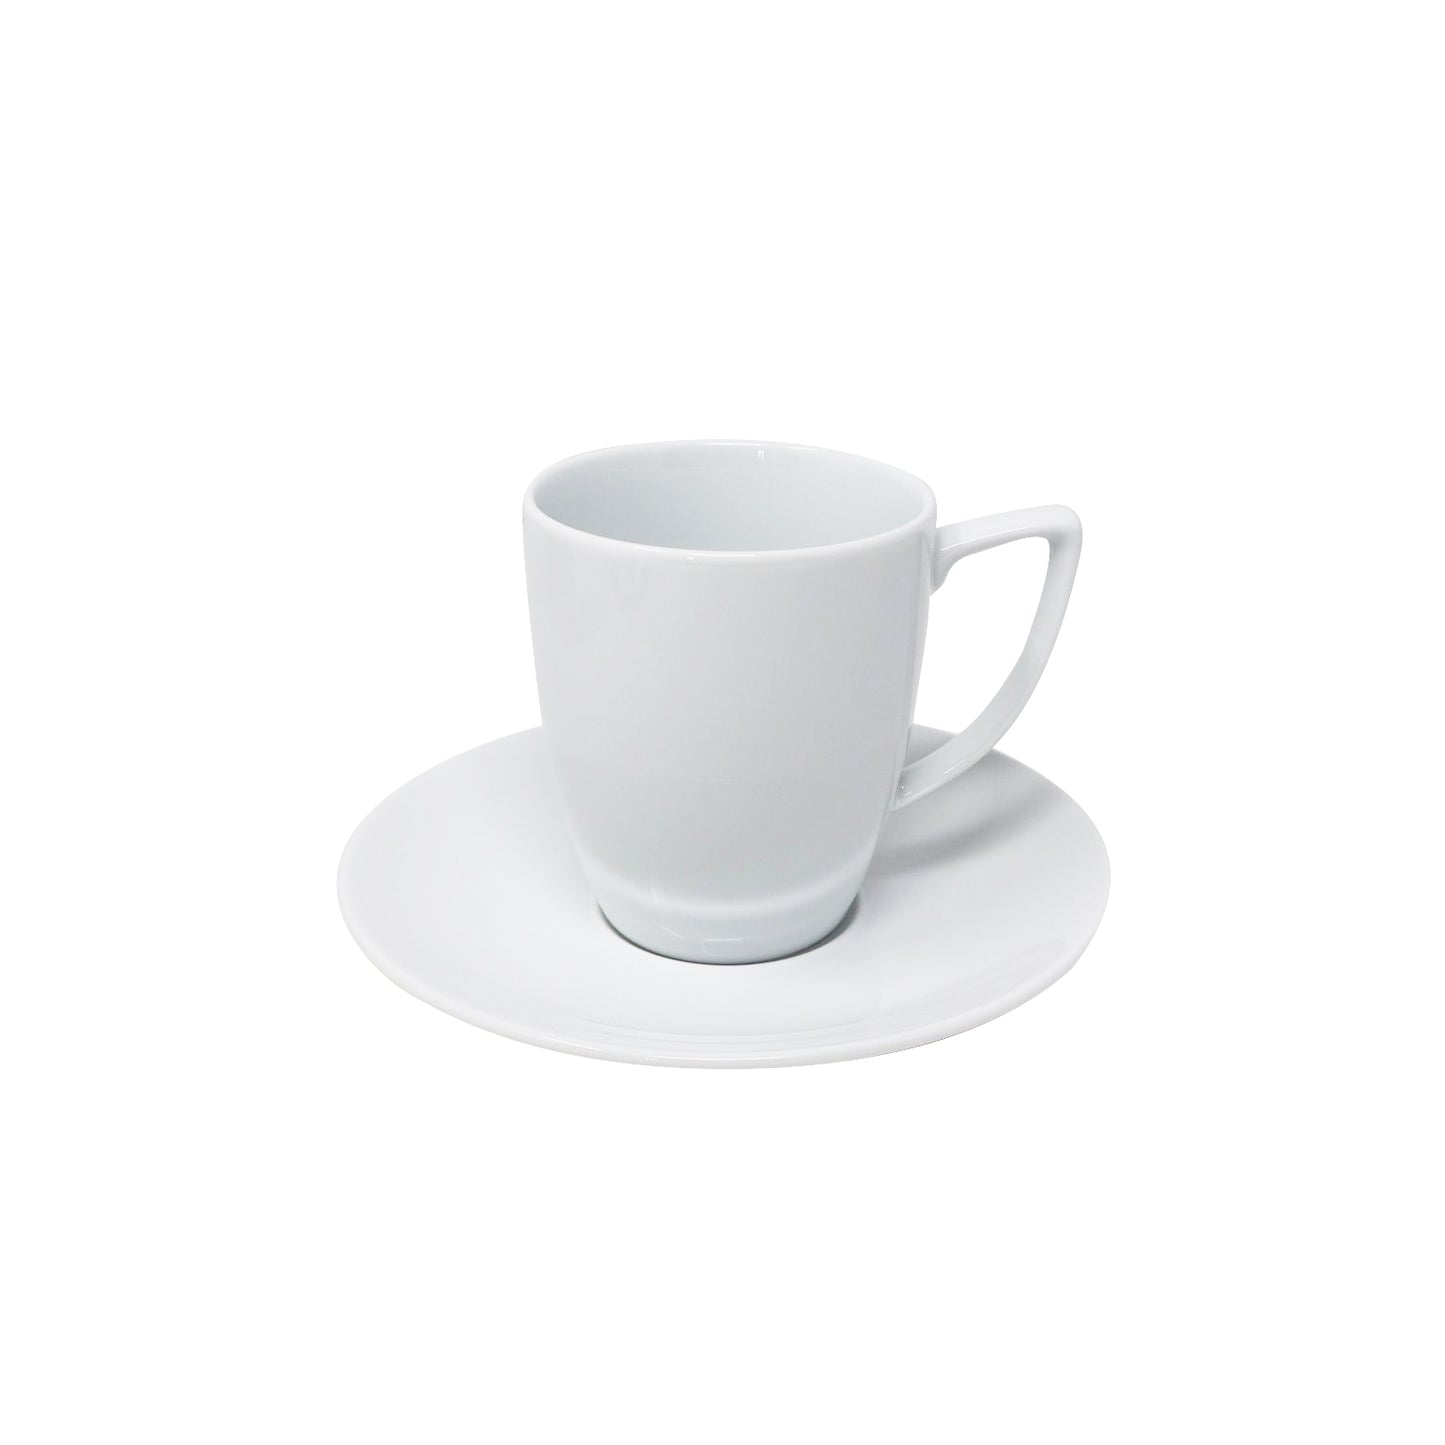 Noritake Lifestyle White Tall Cup Saucer